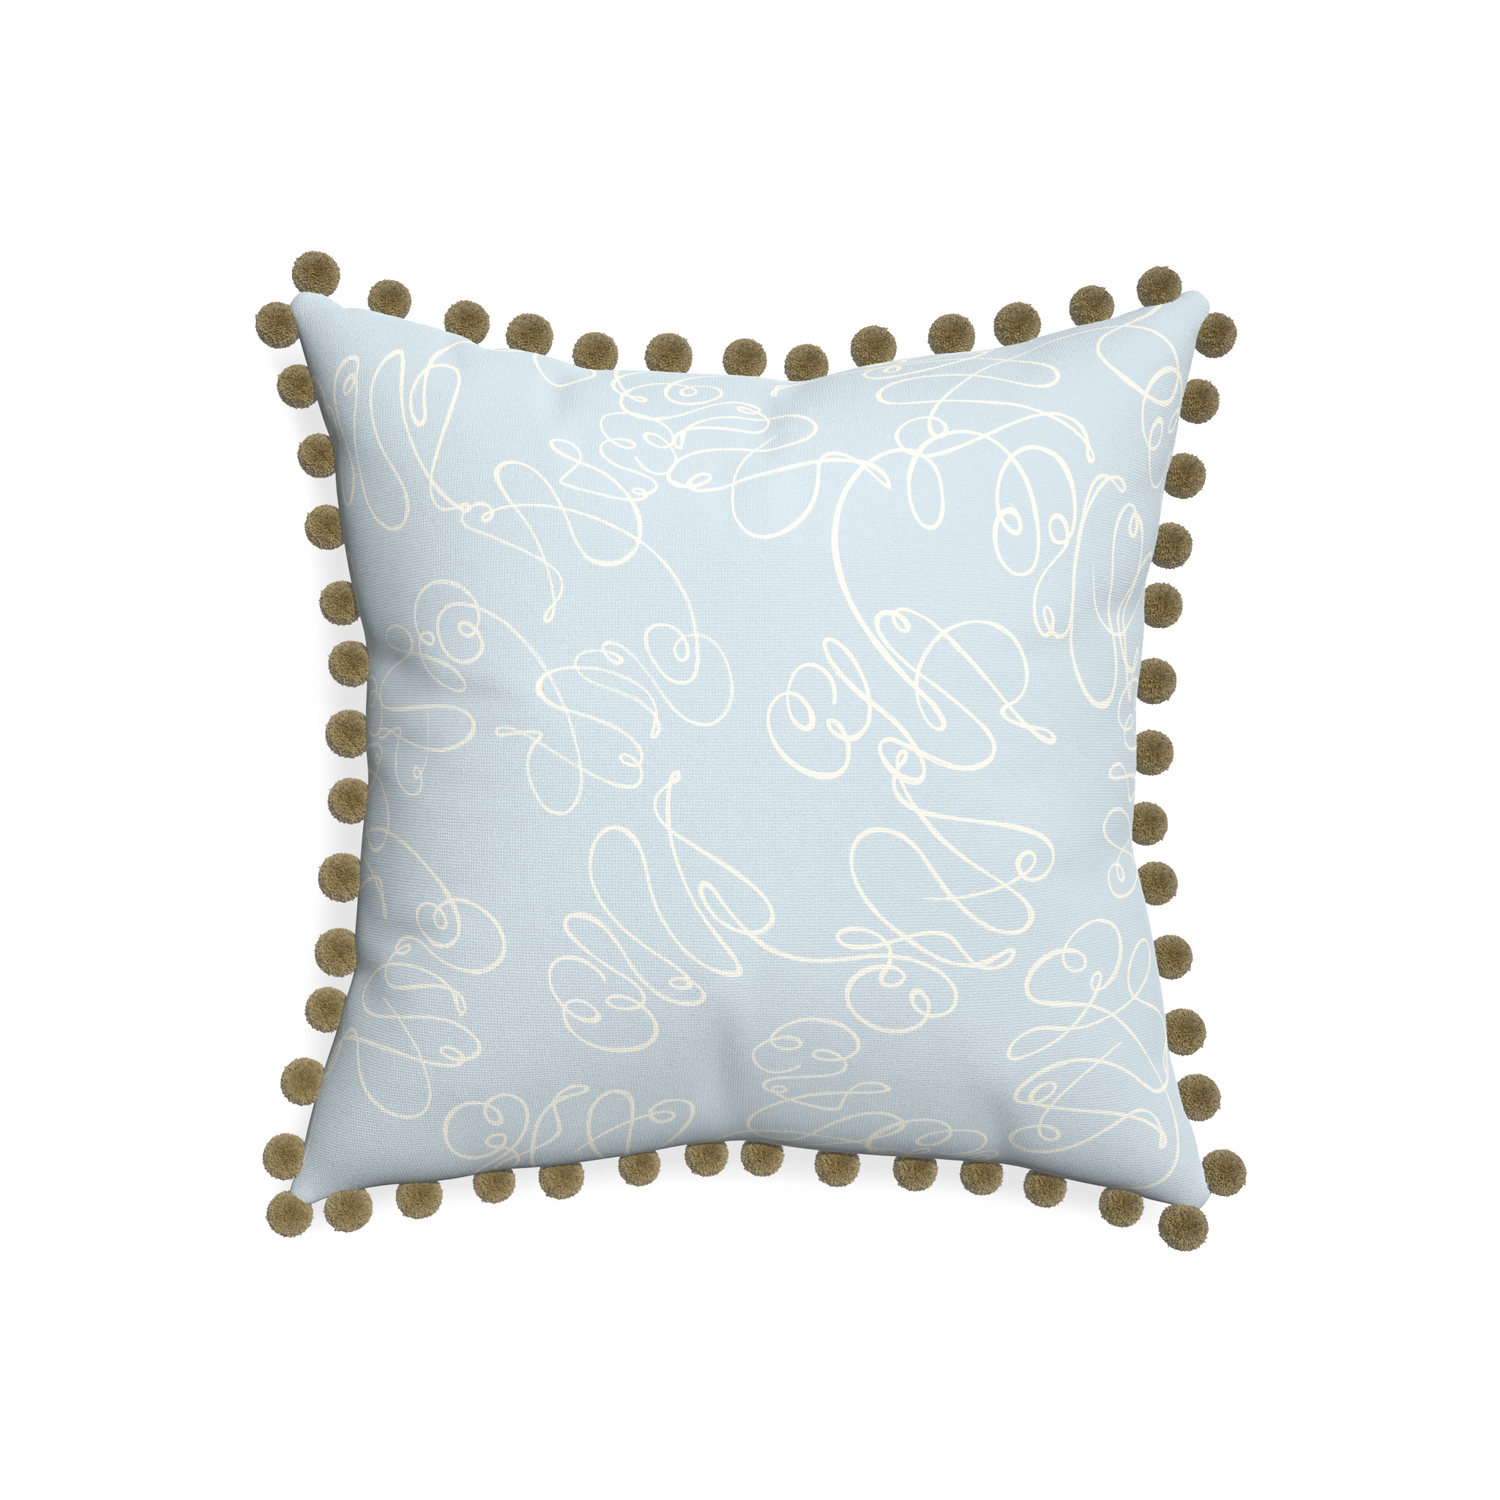 20-square mirabella custom powder blue abstractpillow with olive pom pom on white background